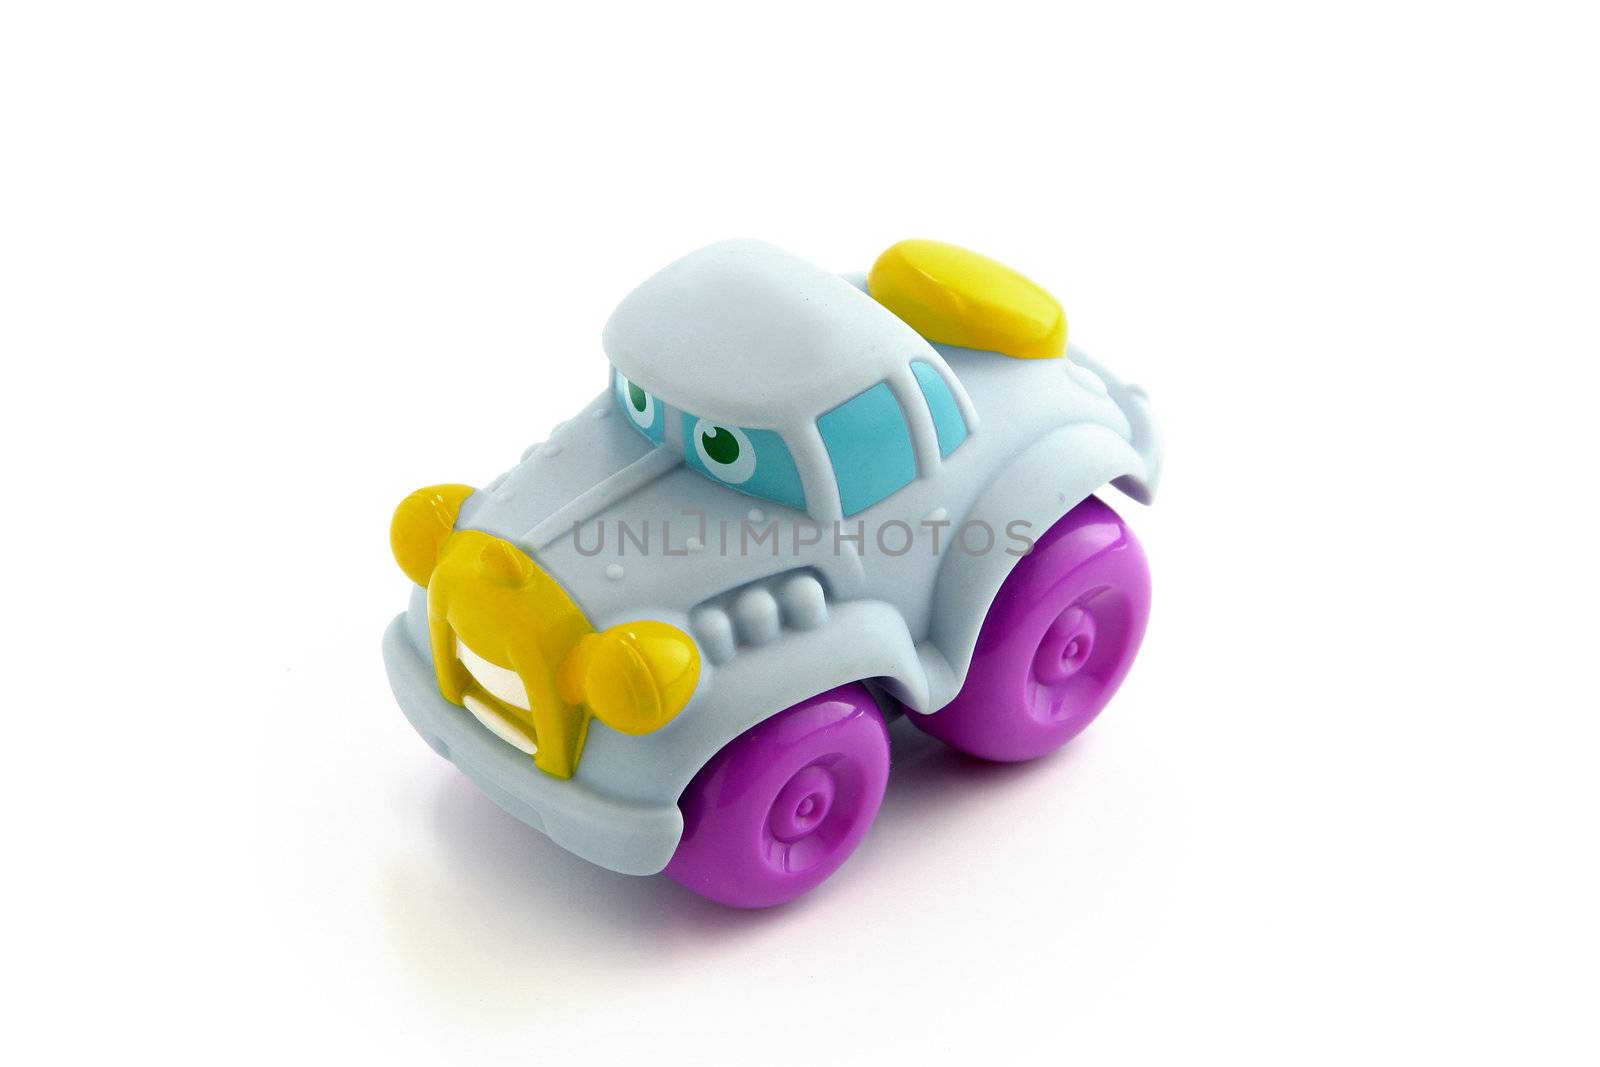 Toy car by phovoir